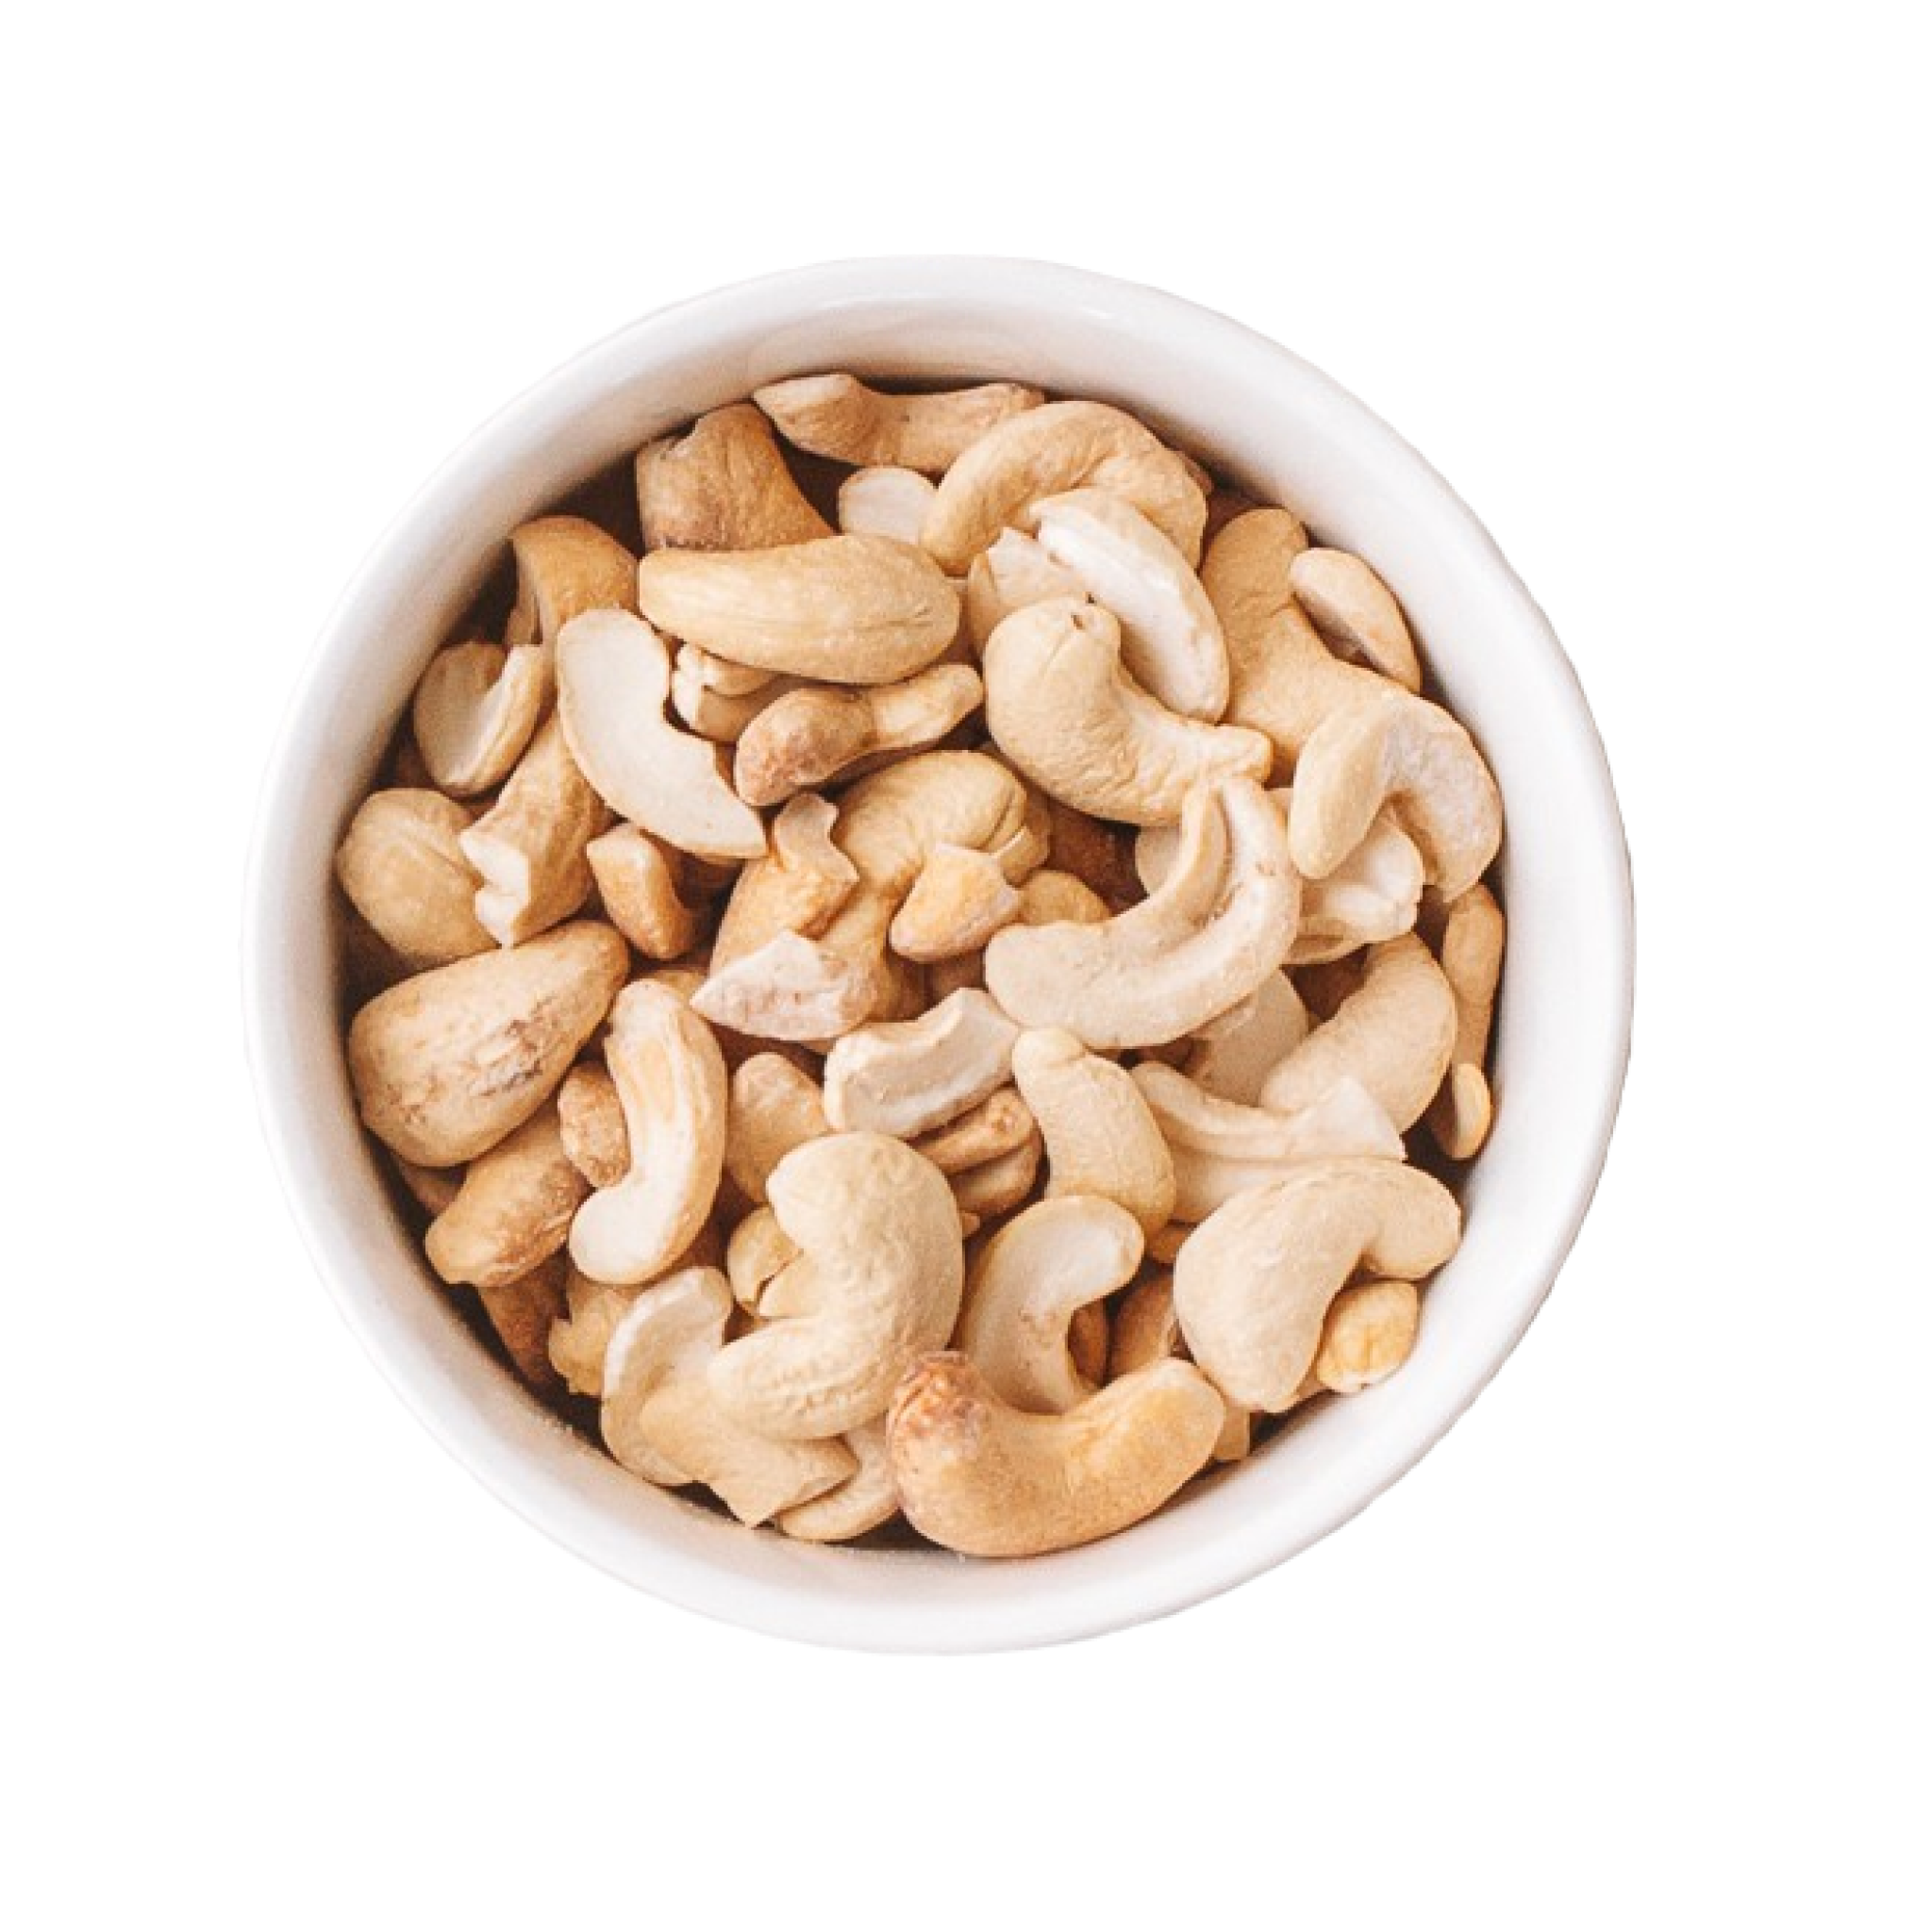 Case of Organic Cashew Pieces - 30 lbs